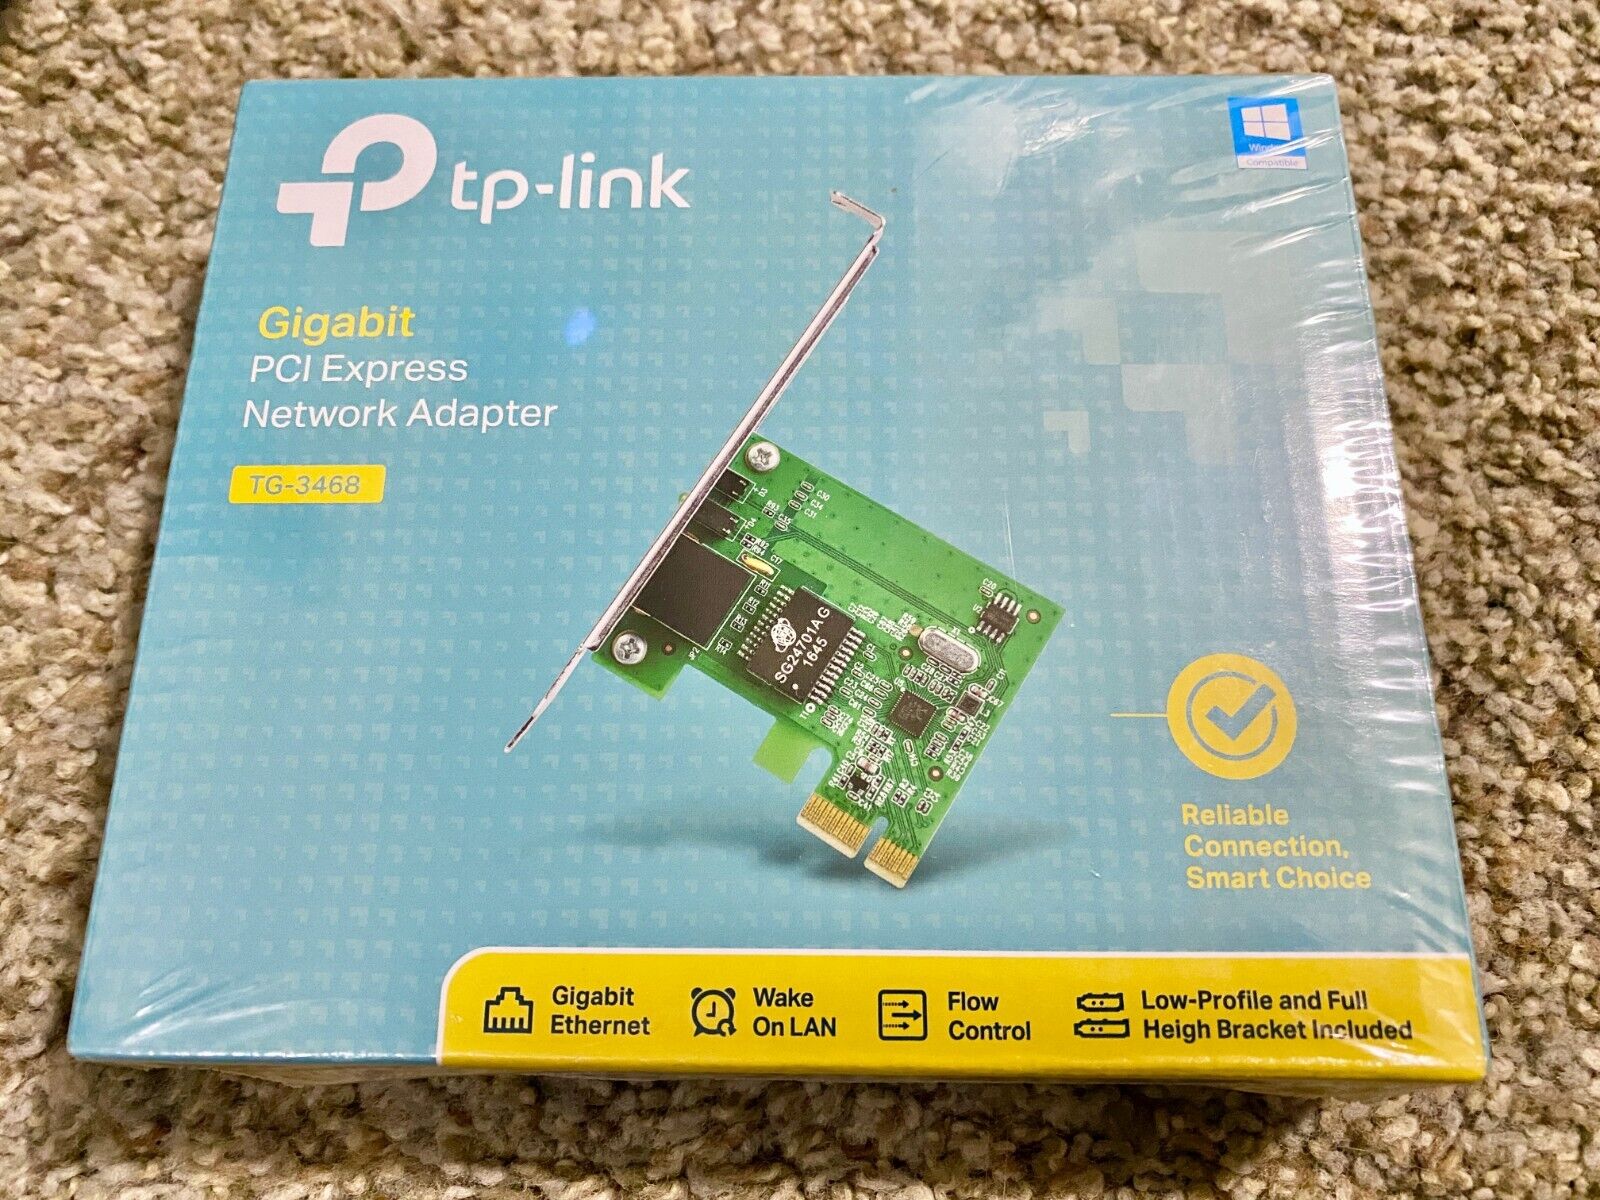 New/Factory Sealed TP-Link TG-3468 Gigabit PCI Express Network Adapter